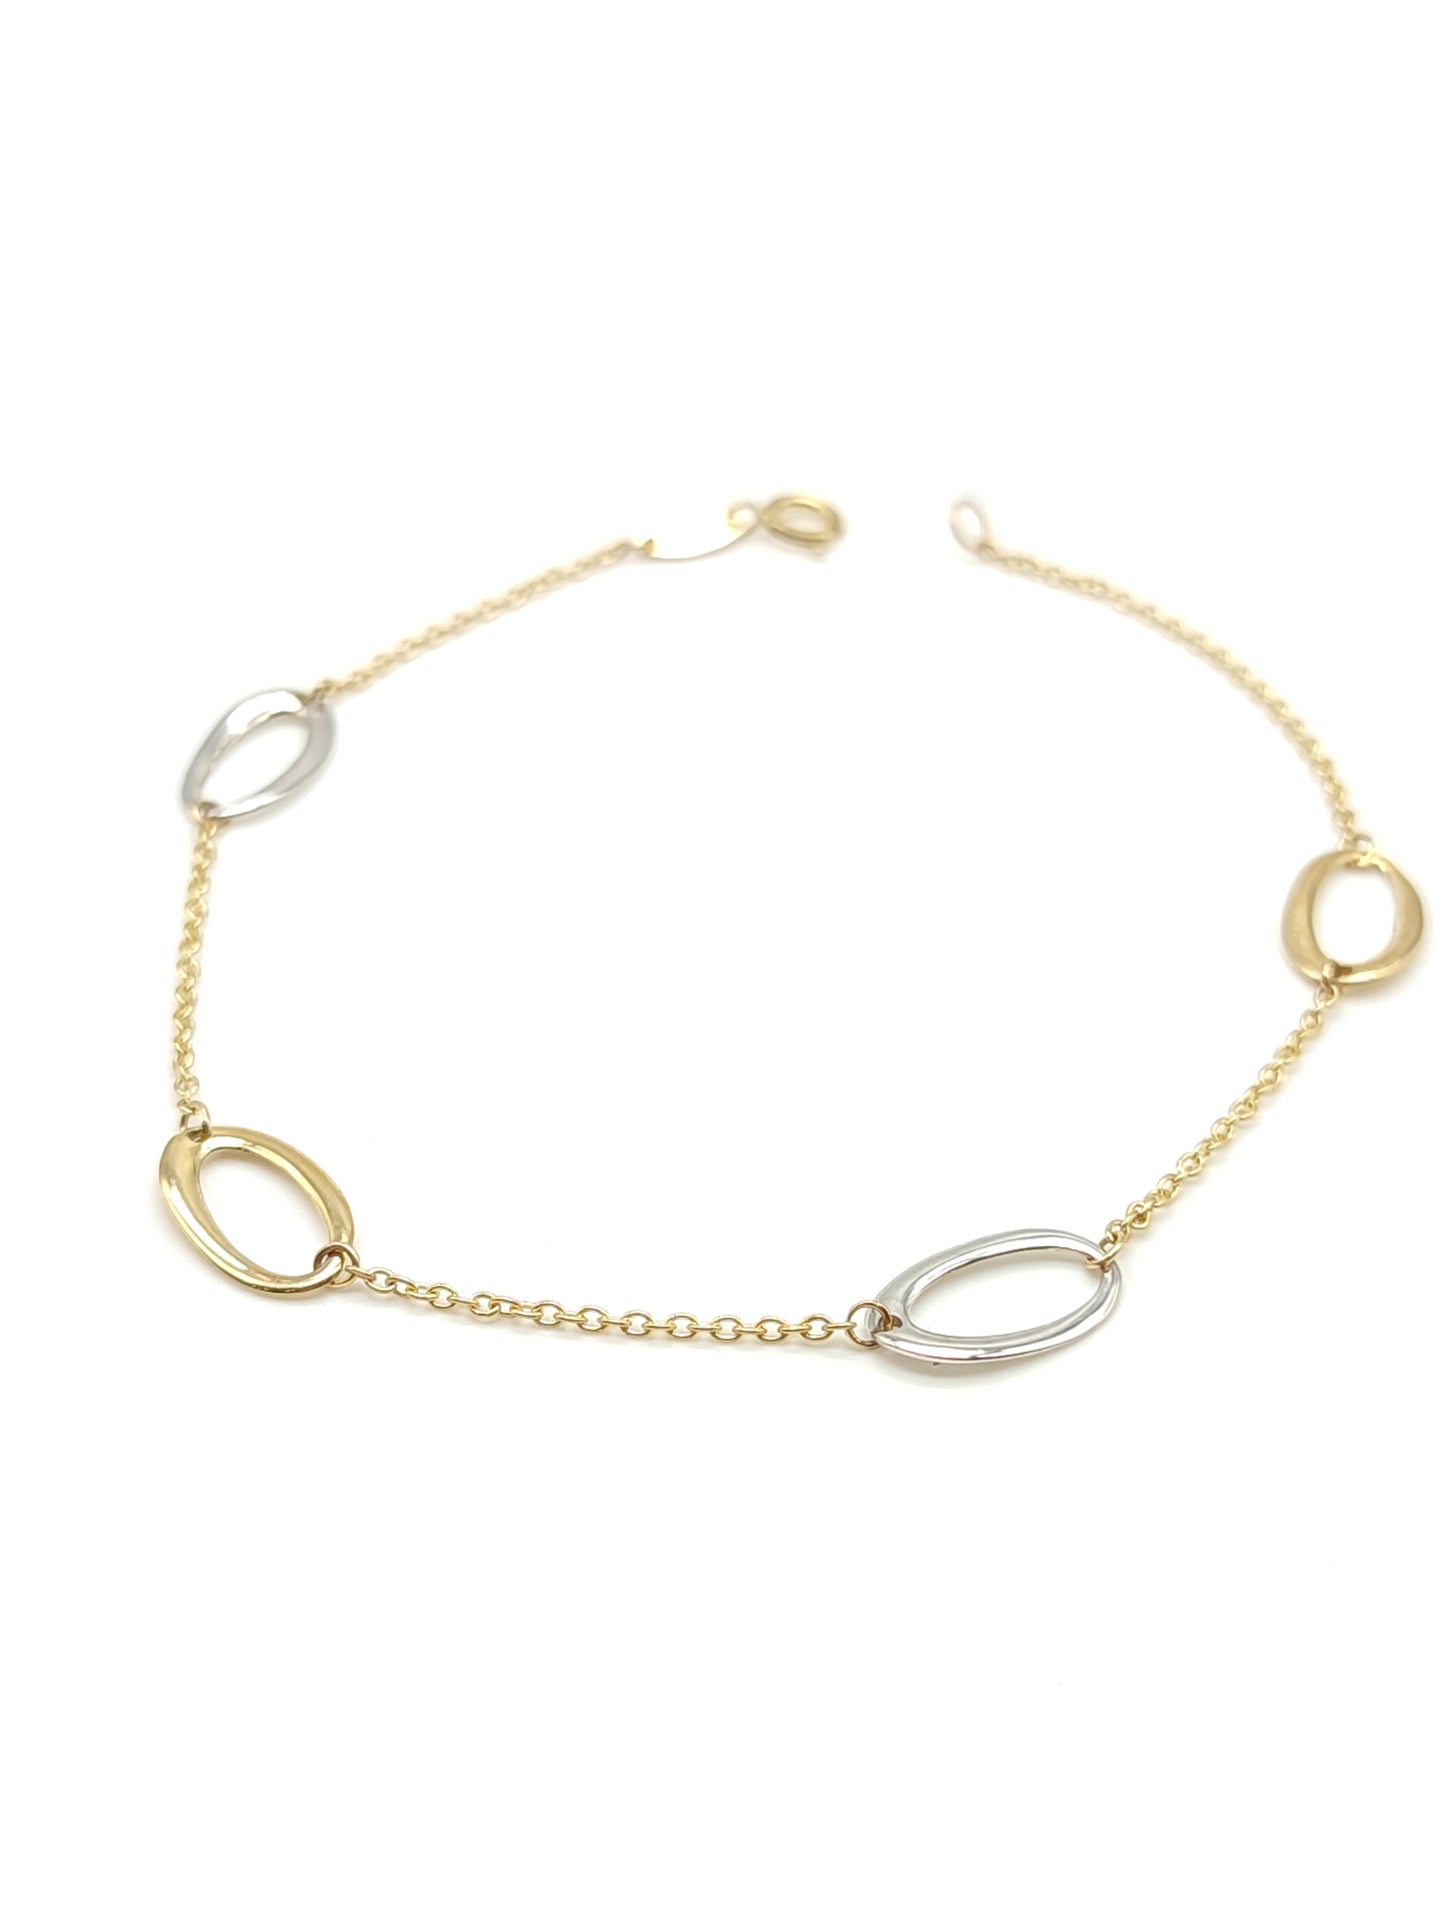 Gold bracelet with oval elements